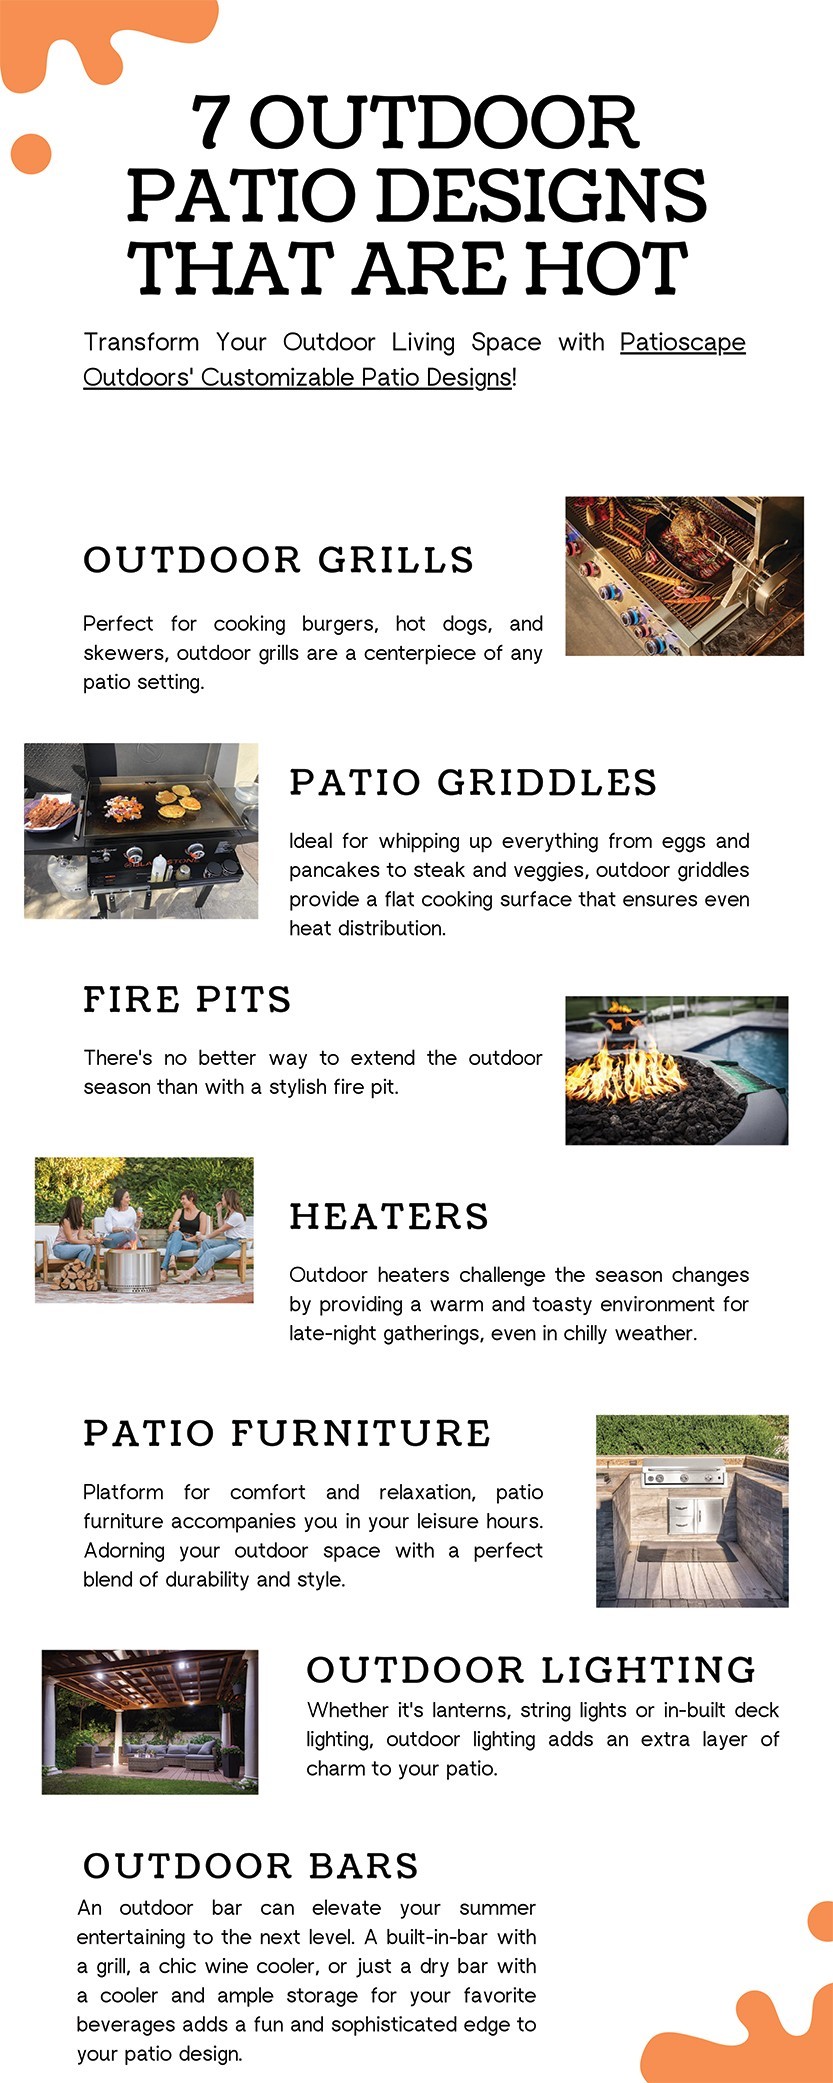 7 Outdoor Patio Designs That are Hot [Infographic]